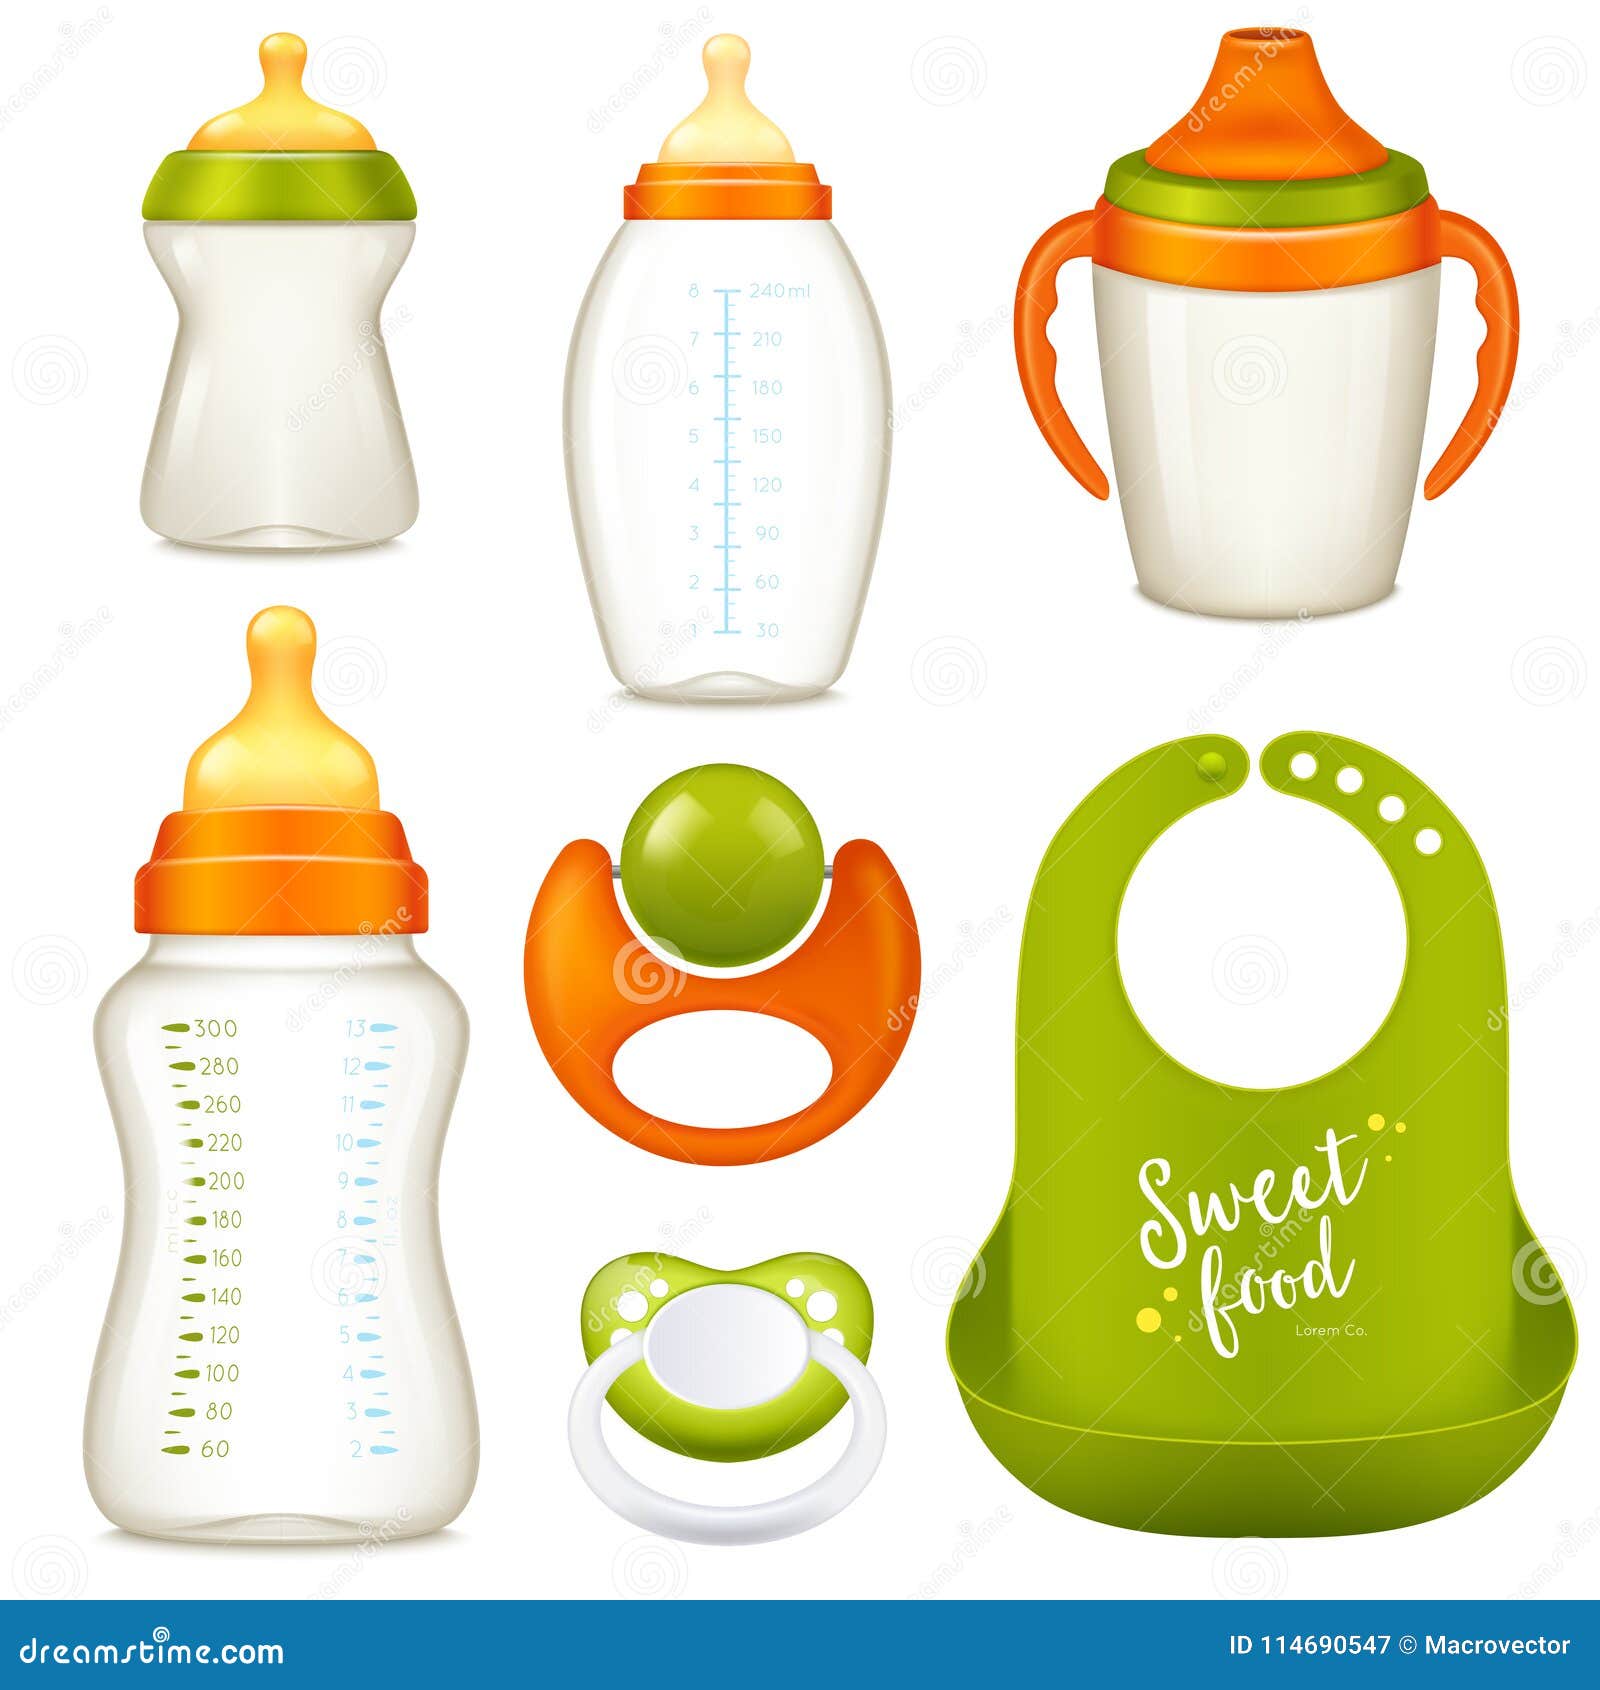 Download Nurser Baby Bottles Collection Stock Vector - Illustration of icons, equipment: 114690547